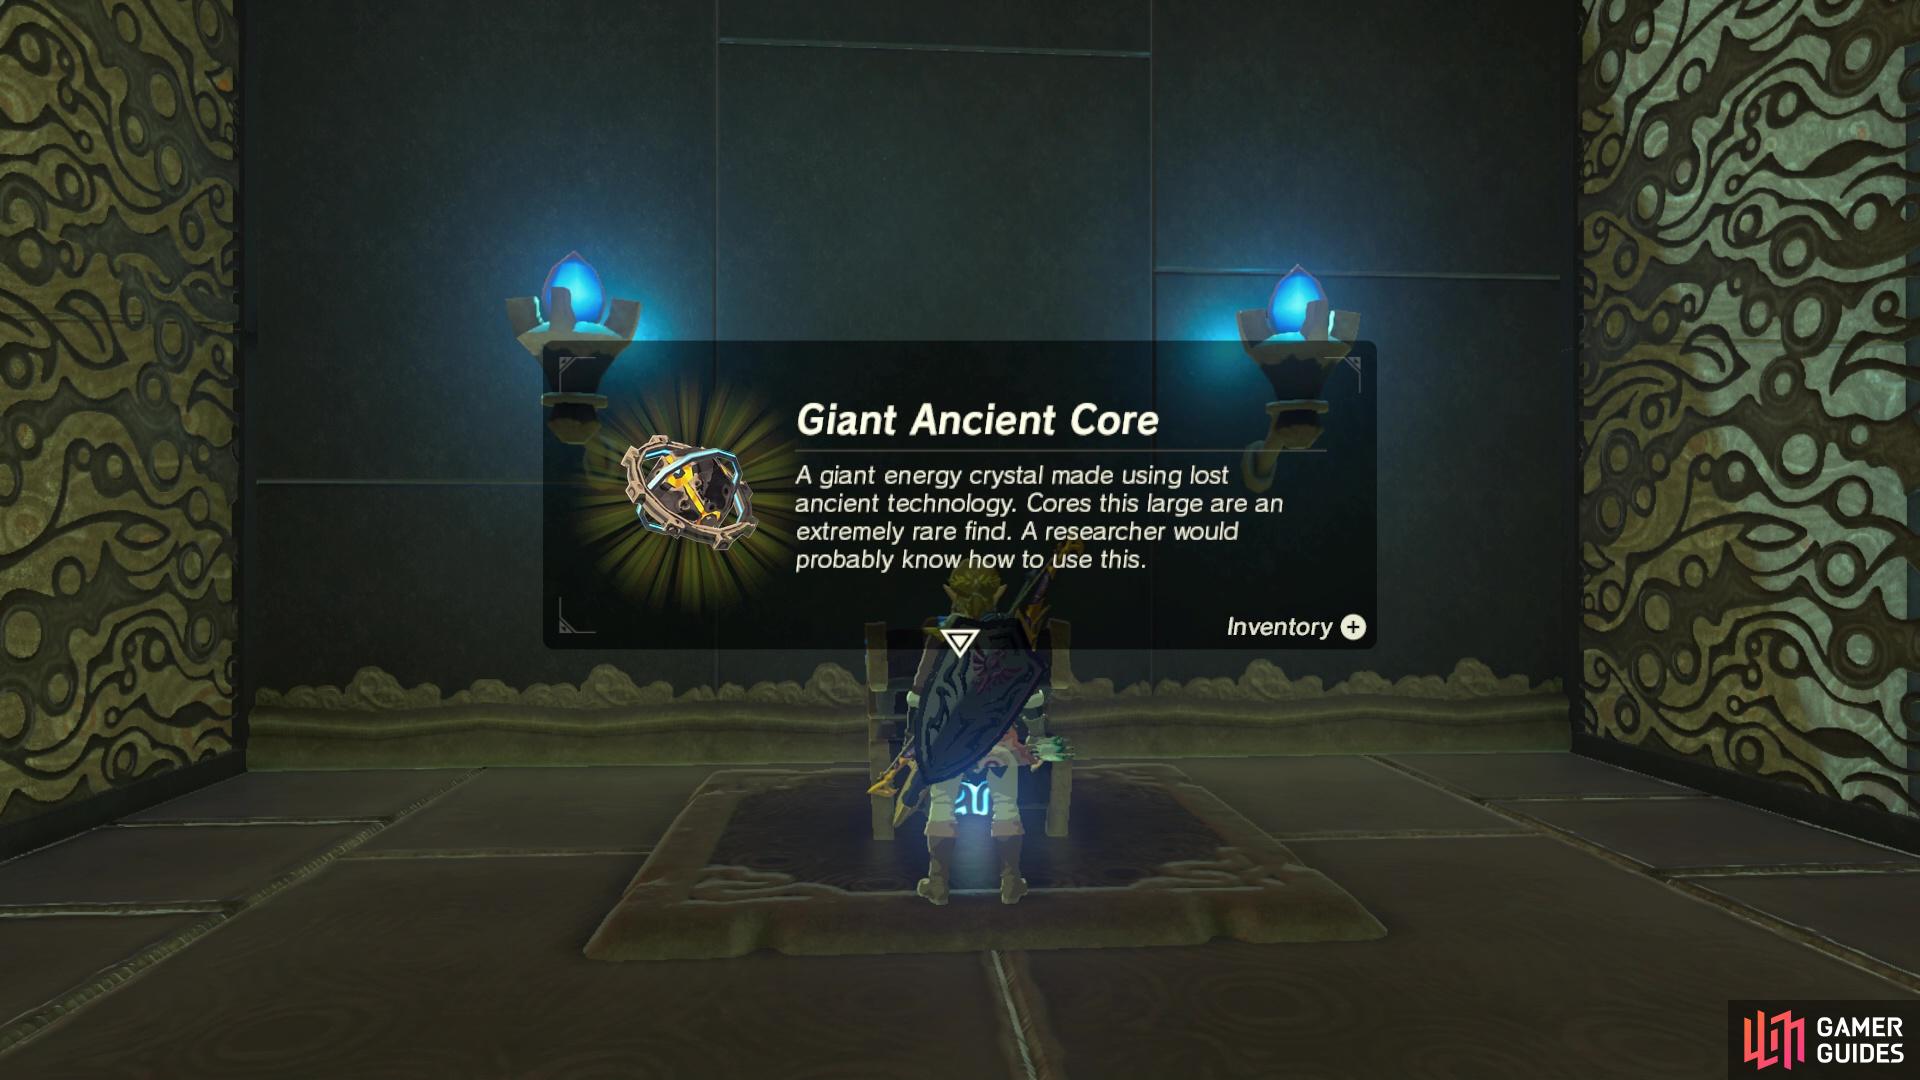 For completing this optional puzzle, you’ll earn a Giant Ancient Core.